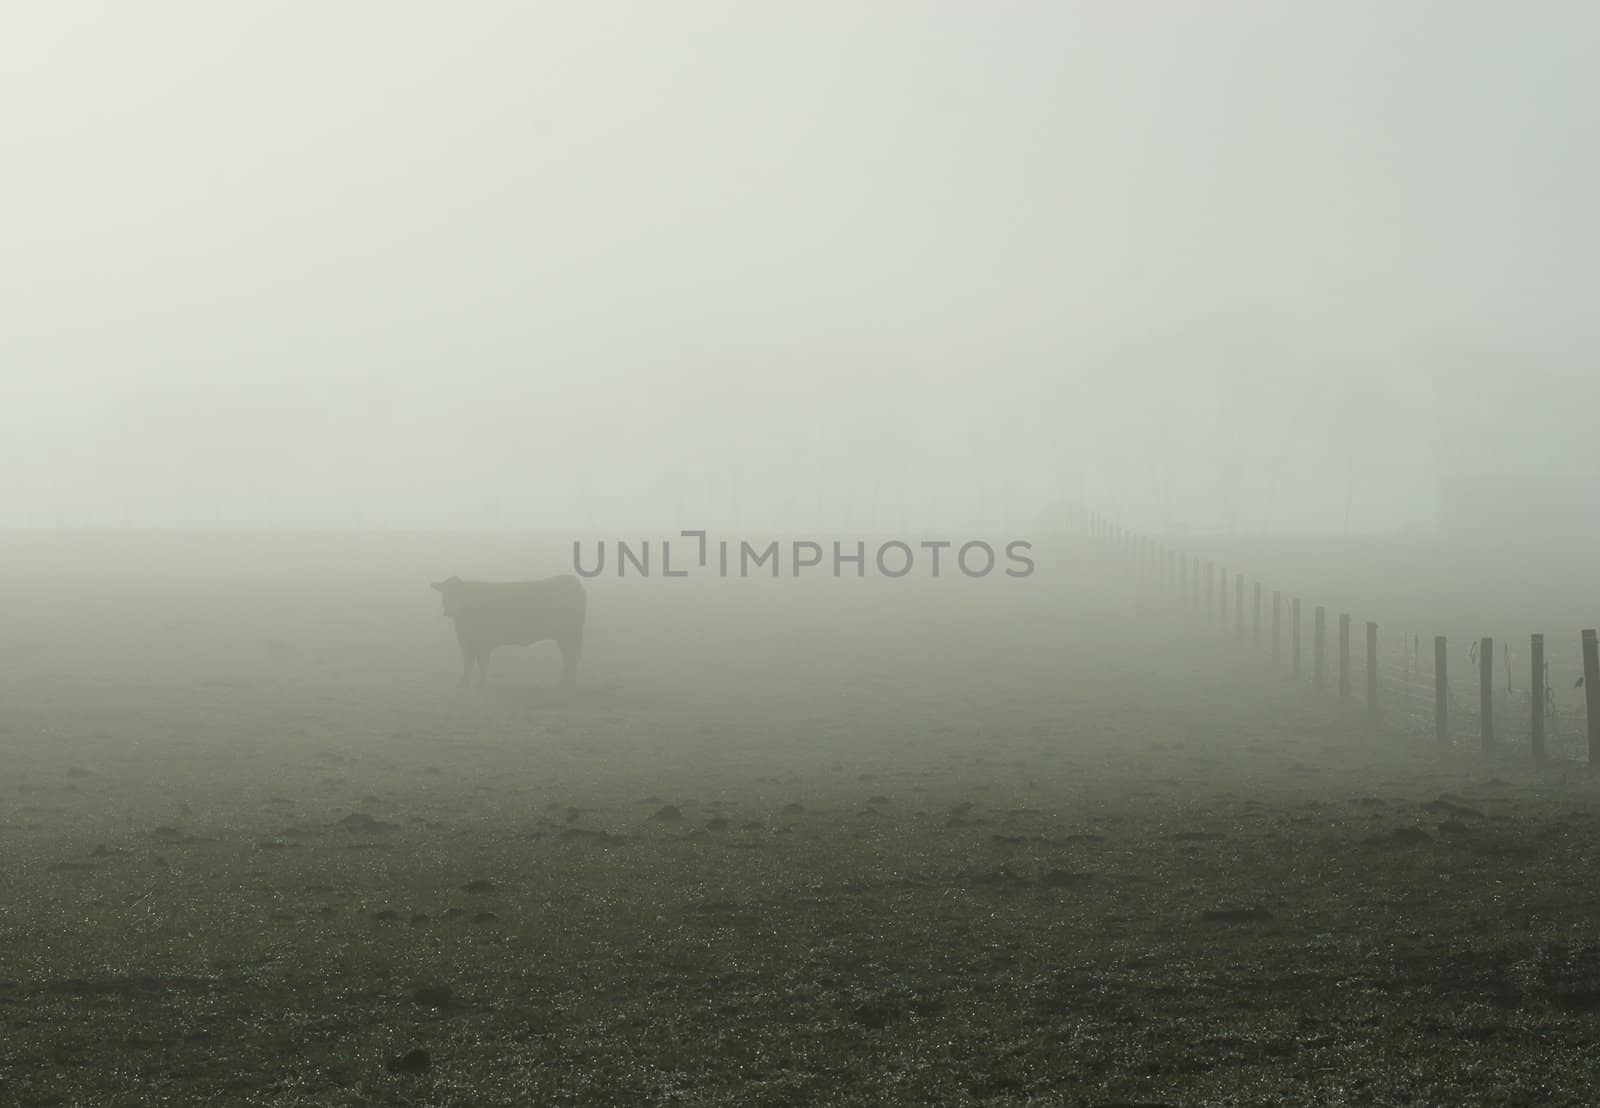 A cow stands in a bare field on a foggy morning. Haumoana, Hawke's Bay New Zealand